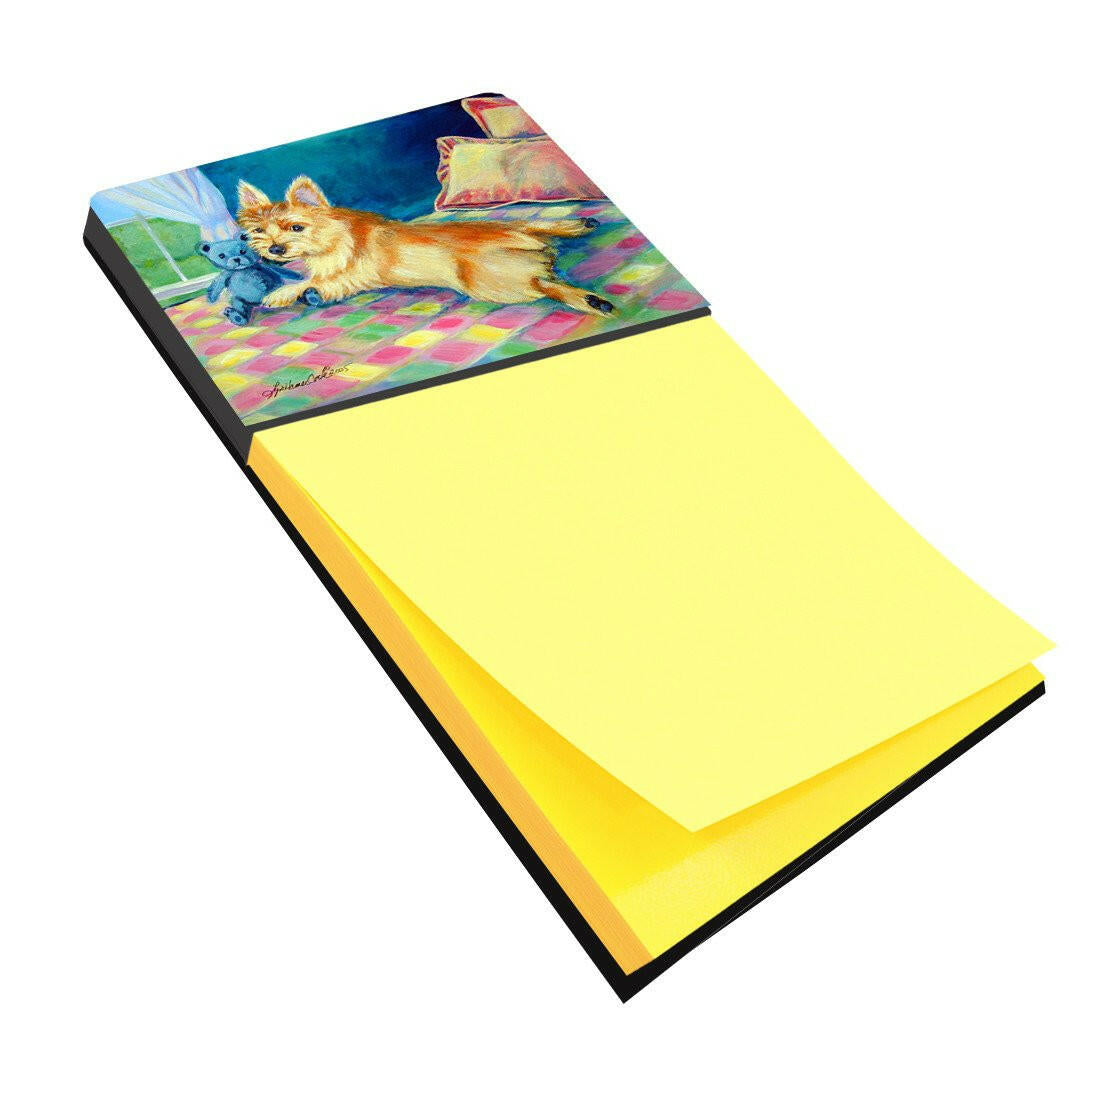 Norwich Refiillable Sticky Note Holder or Postit Note Dispenser 7275SN by Caroline's Treasures